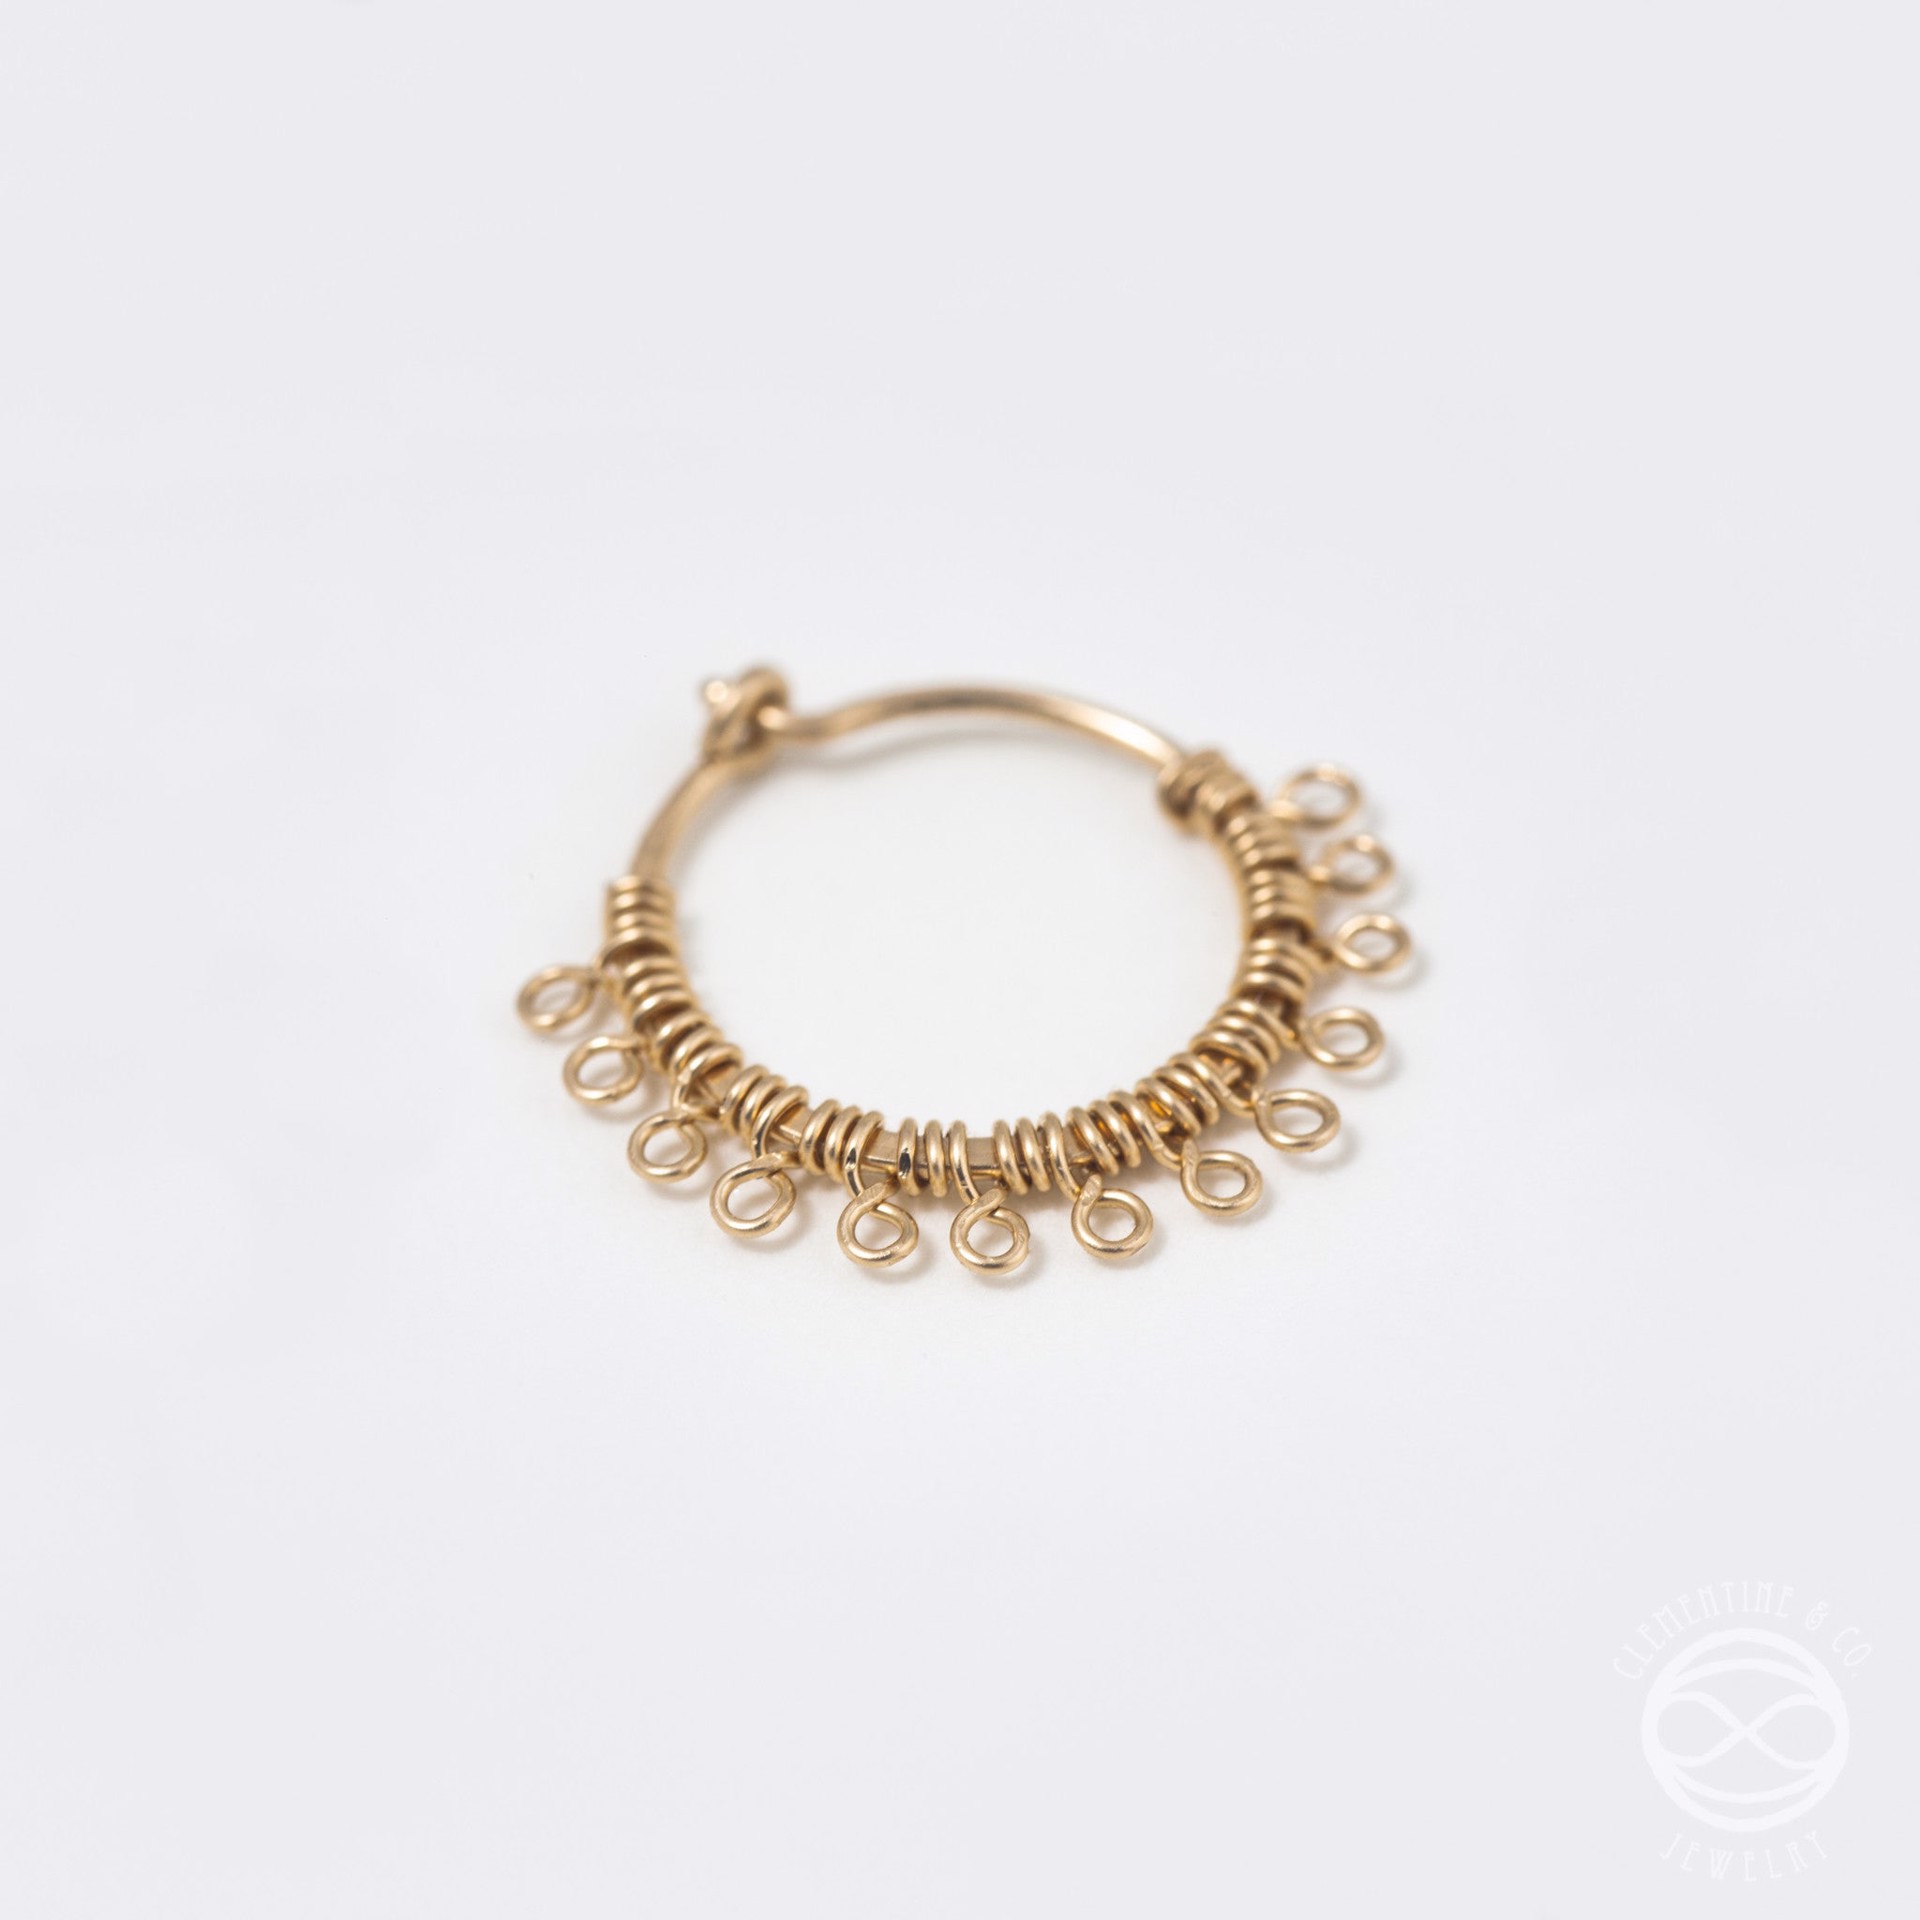 Filigree Nose Ring in Gold - 8mm by Clementine & Co. Jewelry